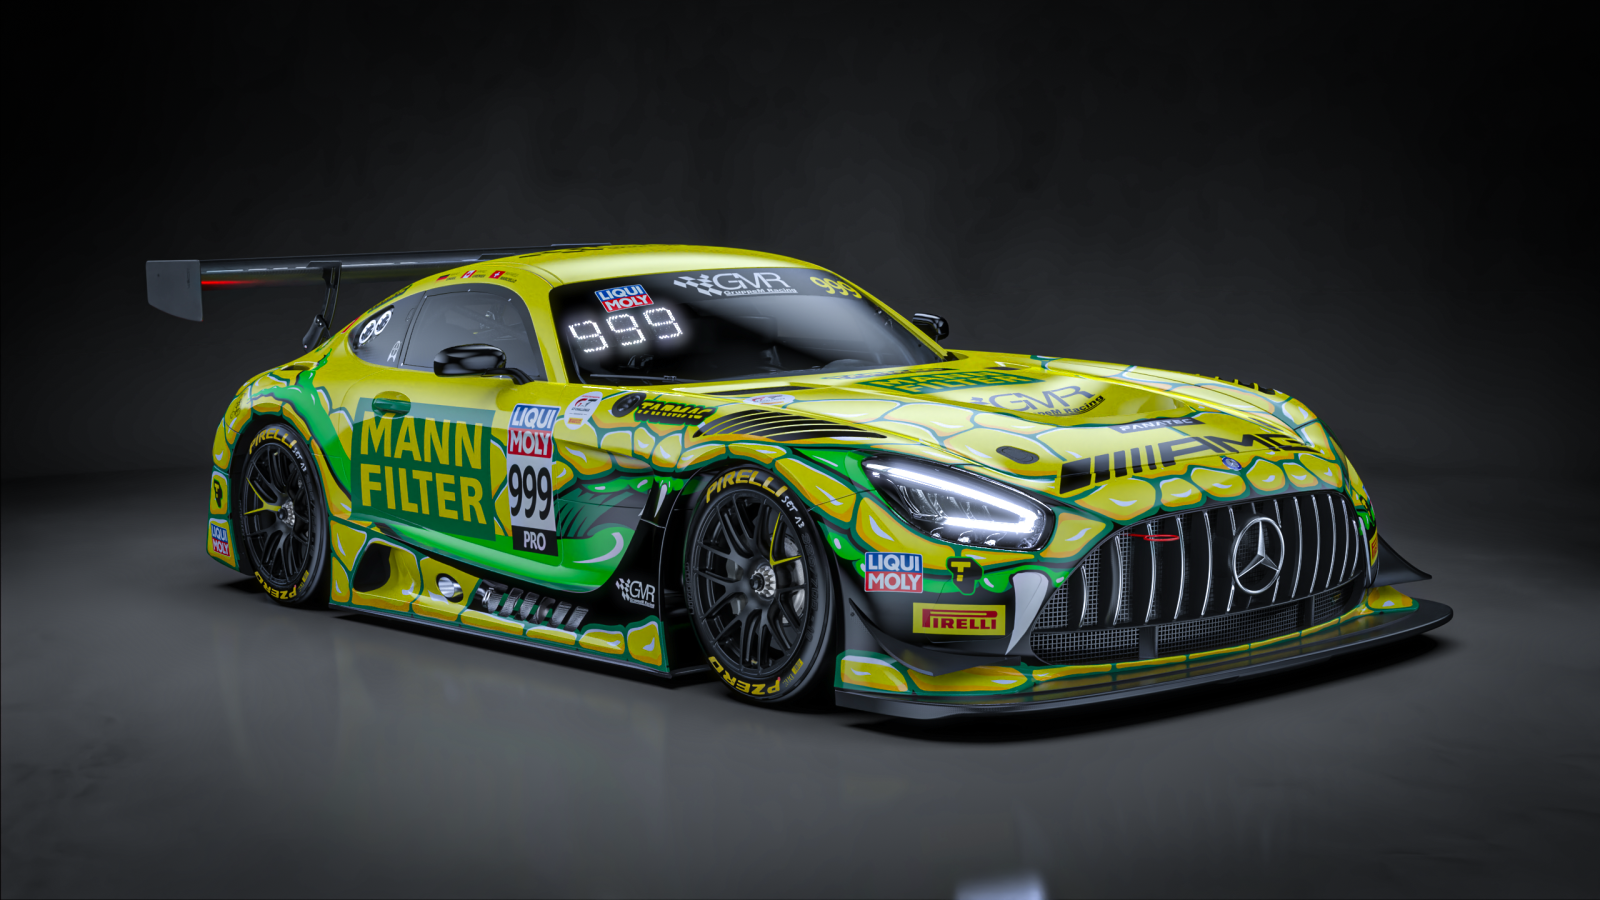 MERCEDES-AMG SET FOR INTERCONTINENTAL GT CHALLENGE POWERED BY PIRELLI TITLE DEFENCE